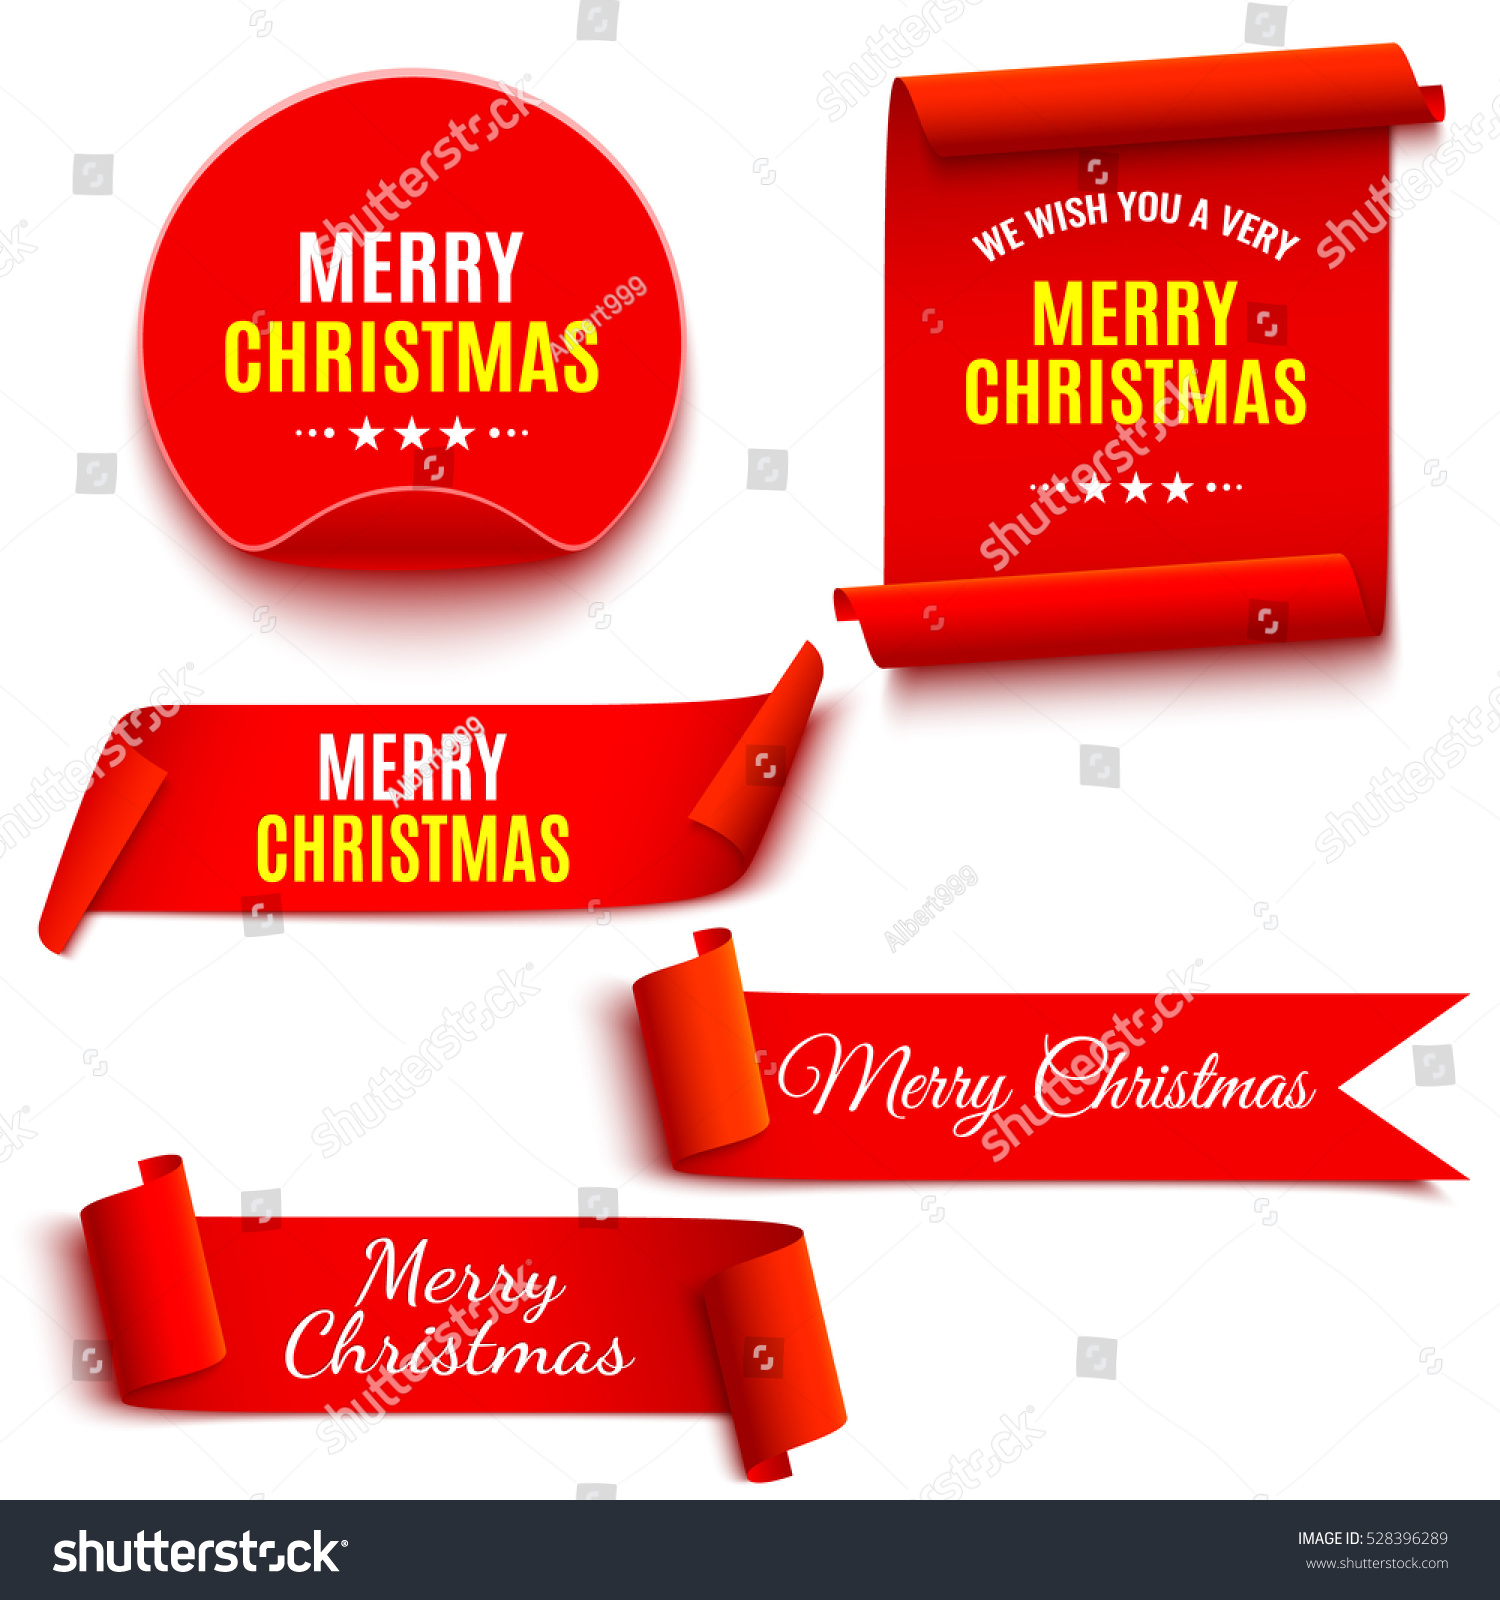 Set of red Christmas banners. Ribbons and round sticker. Paper scrolls. Vector illustration. #528396289